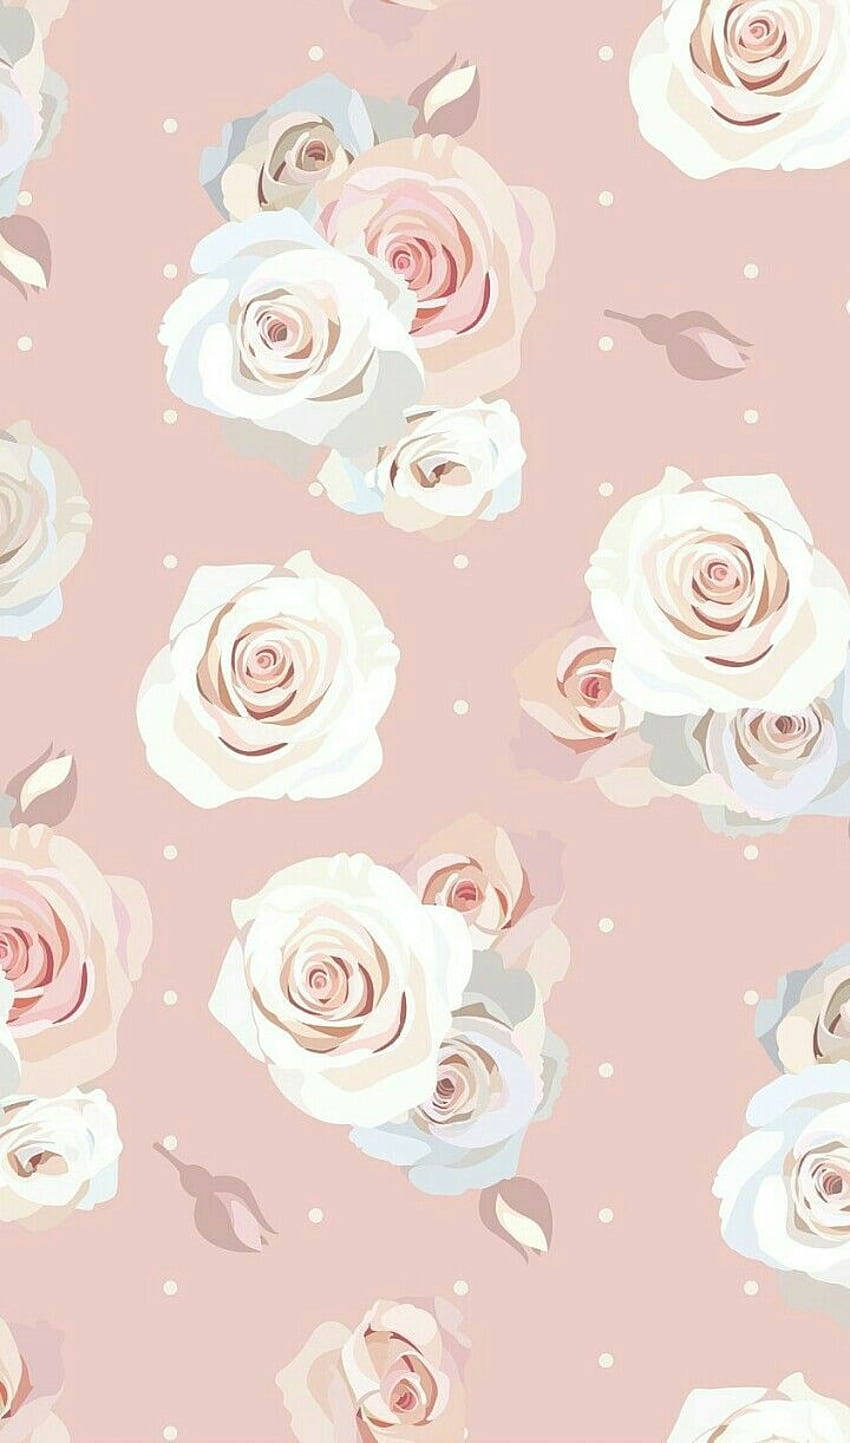 Carla on . Flowery , Floral iphone, Pink iphone, Cute Pastel Floral HD phone wallpaper